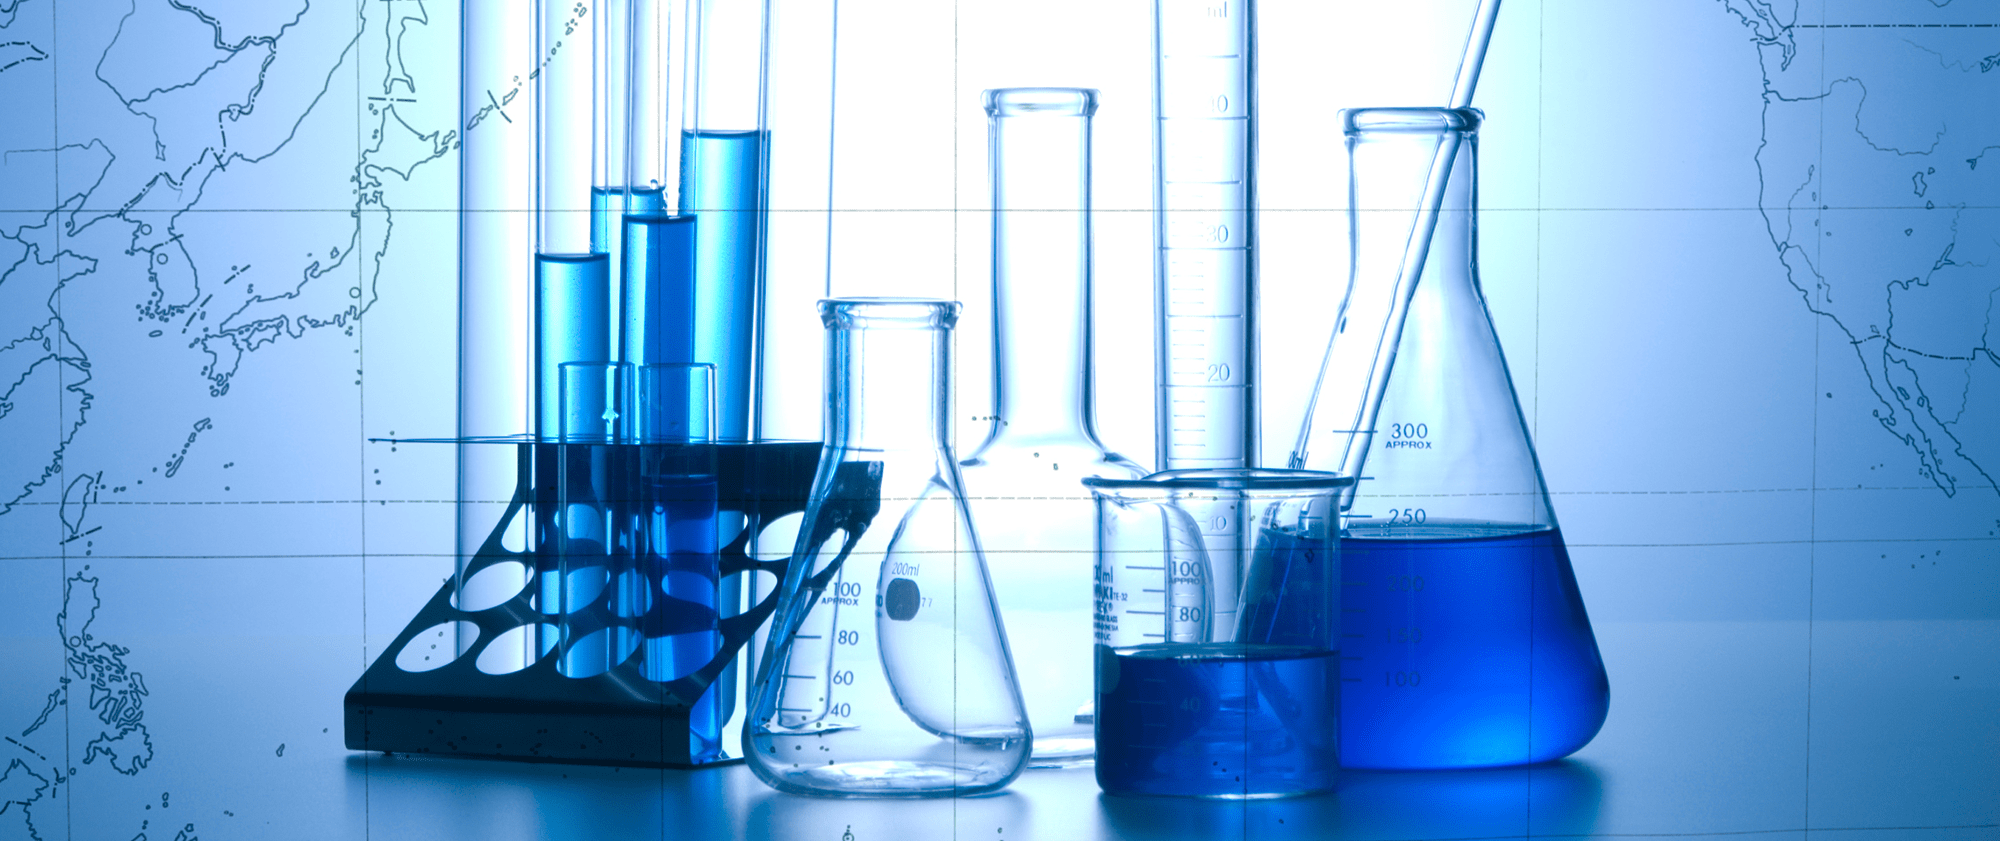 Beakers and test tubes